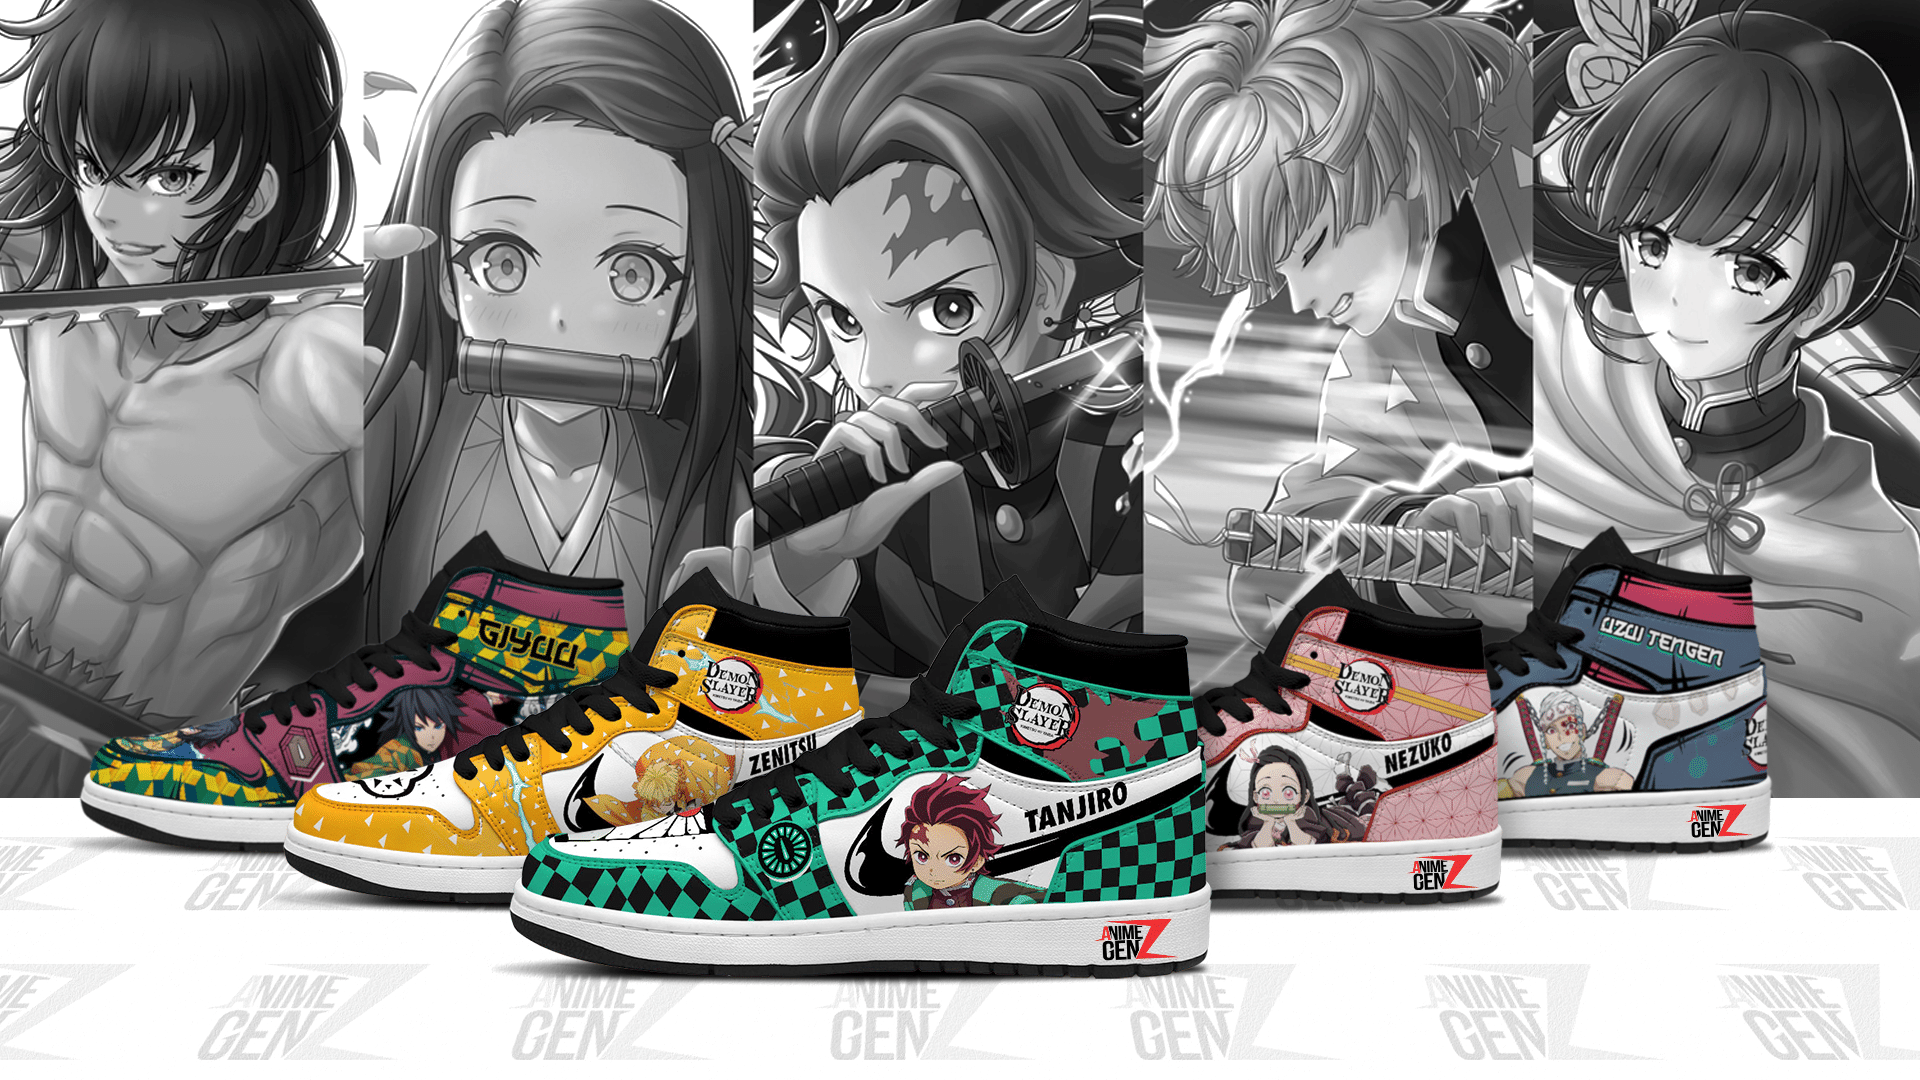 Demon Slayer JD Sneakers Anime Shoes Shop | Anime Custom Shoes The Best Design | Top #1 Anime Shoes Shop